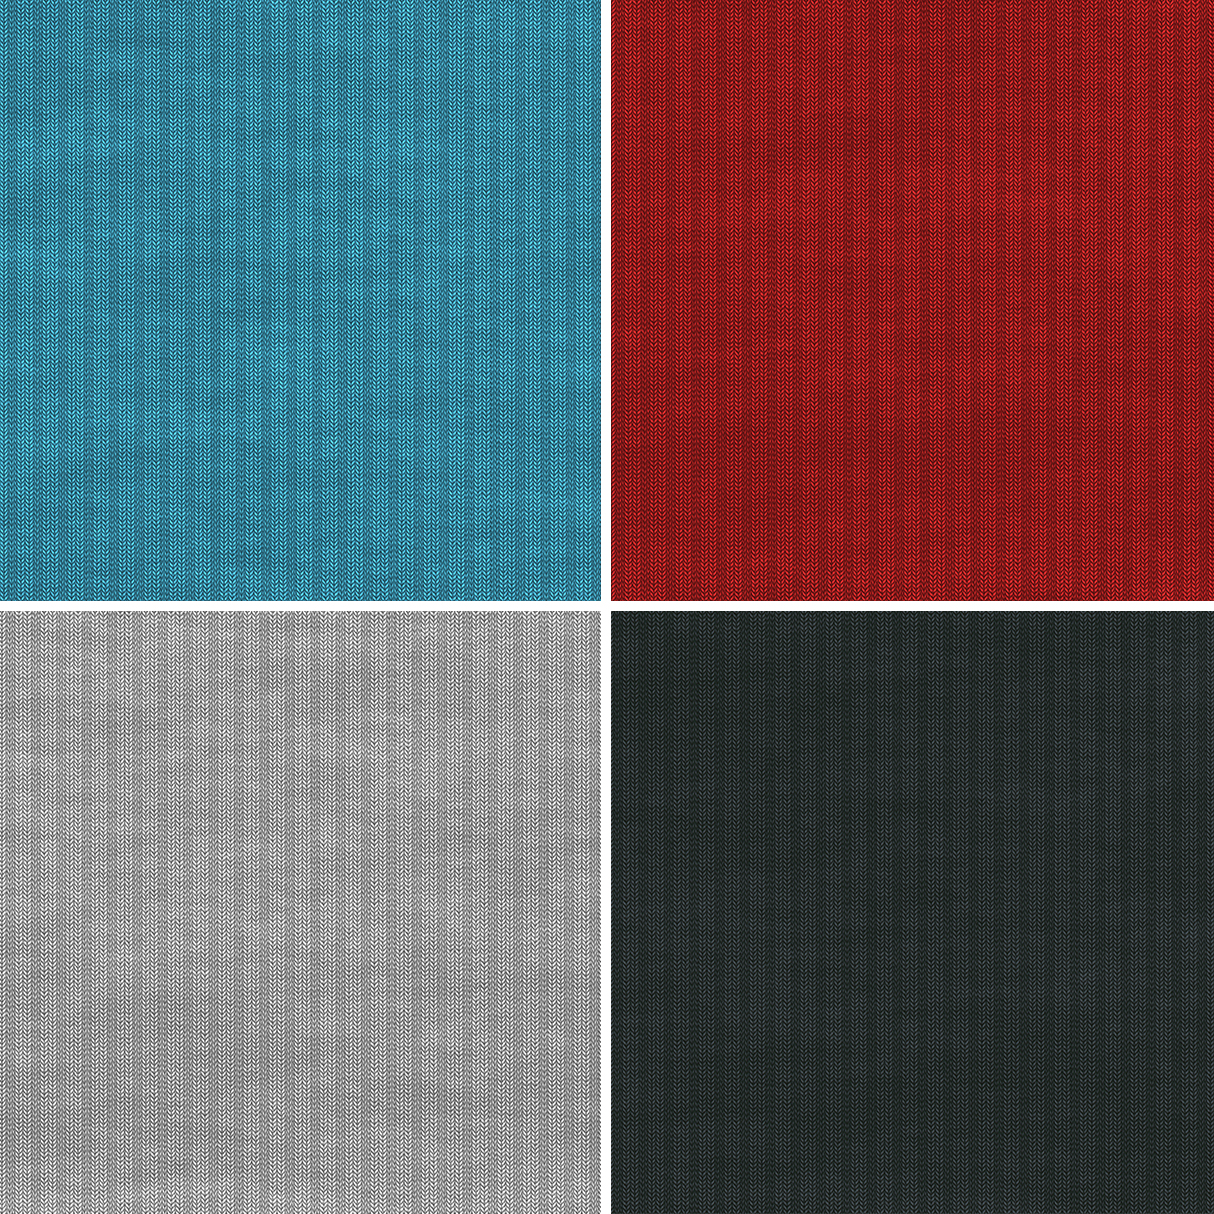 30 Knitted Background Textures Samples Preview – Part 1